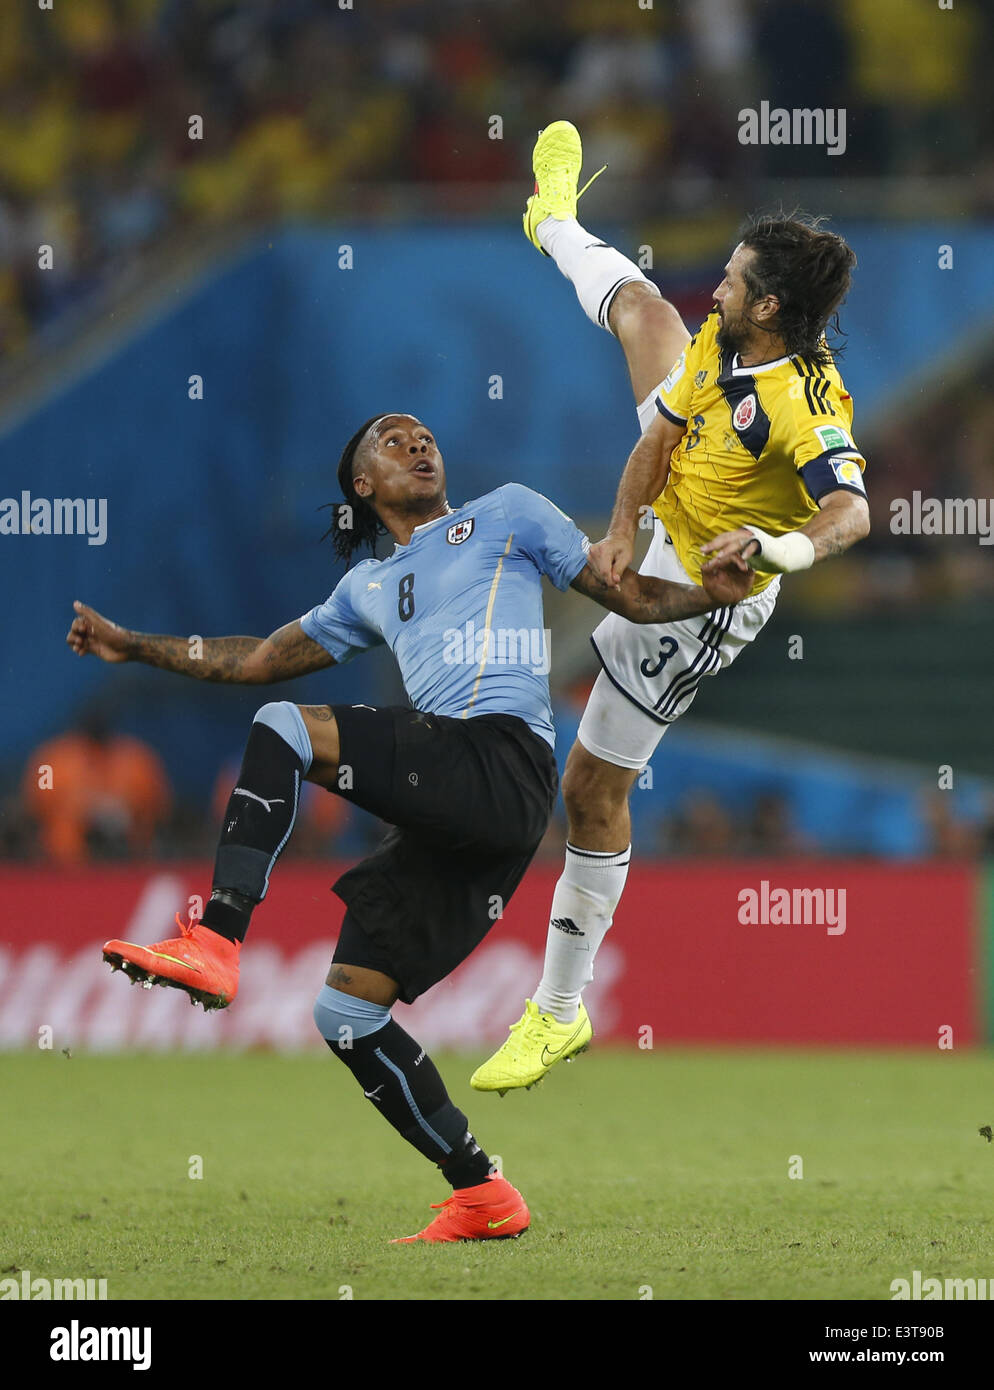 Rio De Janeiro, Brazil. 28th June, 2014. Colombia's Mario Yepes (R) vies with Uruguay's Abel Hernandez during a Round of 16 match between Colombia and Uruguay of 2014 FIFA World Cup at the Estadio do Maracana Stadium in Rio de Janeiro, Brazil, on June 28, 2014. Colombia won 2-0 over Uruguay and qualified for Quarter-finals on Saturday. Credit:  Wang Lili/Xinhua/Alamy Live News Stock Photo